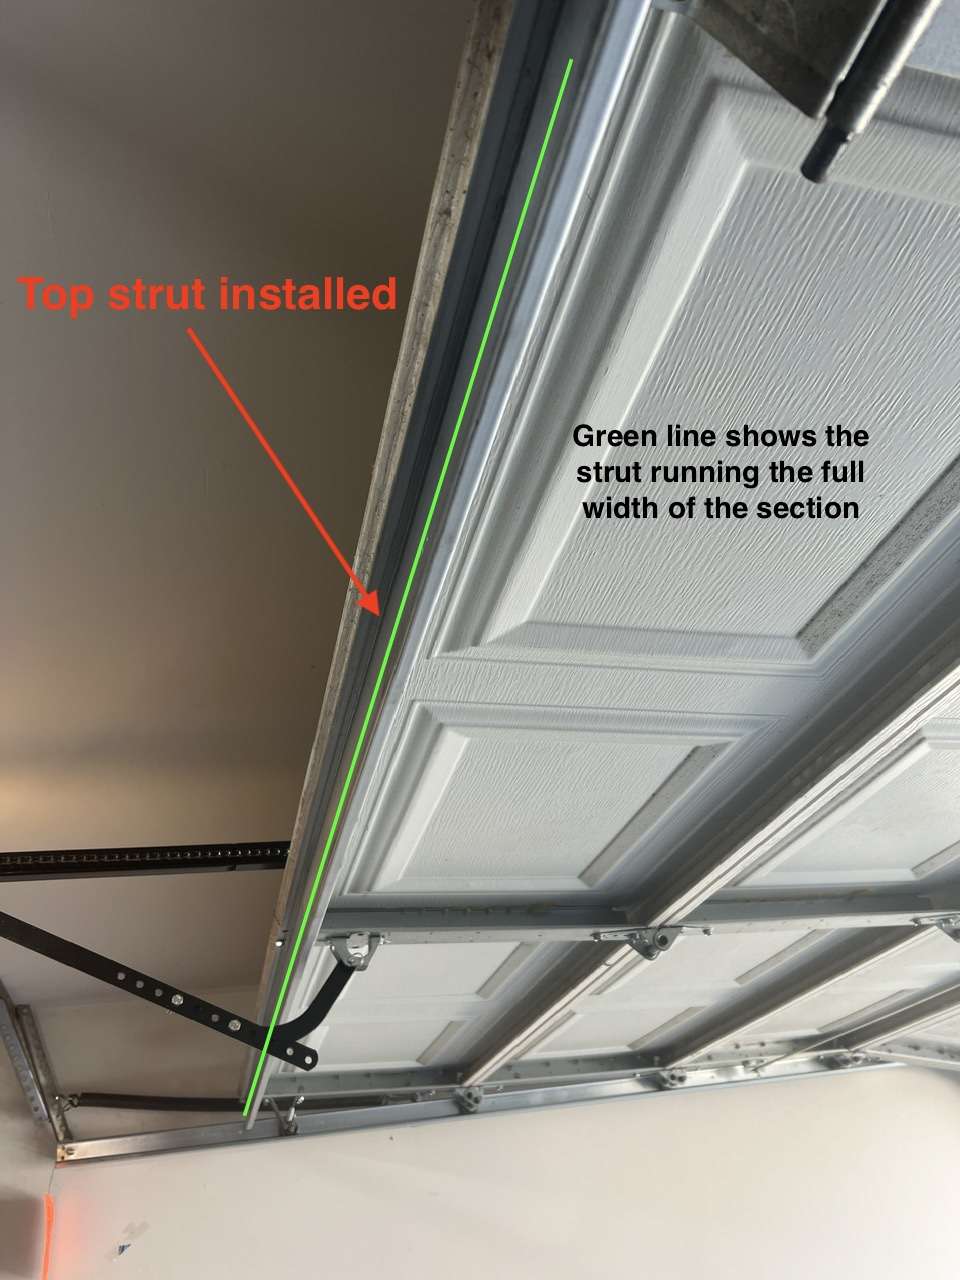 This image shows a top reinforcement strut installed on the top section of a single car garage door.